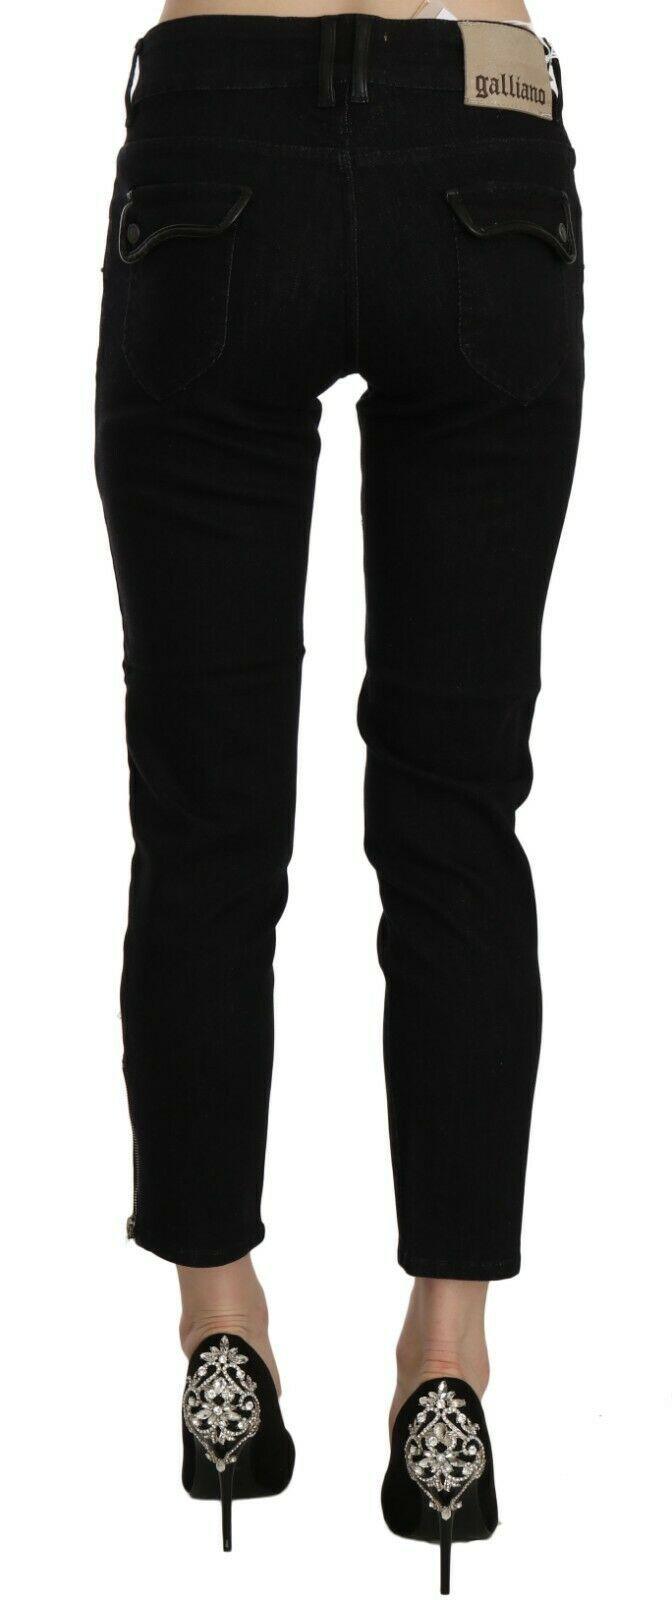 Black Mid Waist Cropped Cut Hem Denim Casual Pants - Designed by John Galliano Available to Buy at a Discounted Price on Moon Behind The Hill Online Designer Discount Store